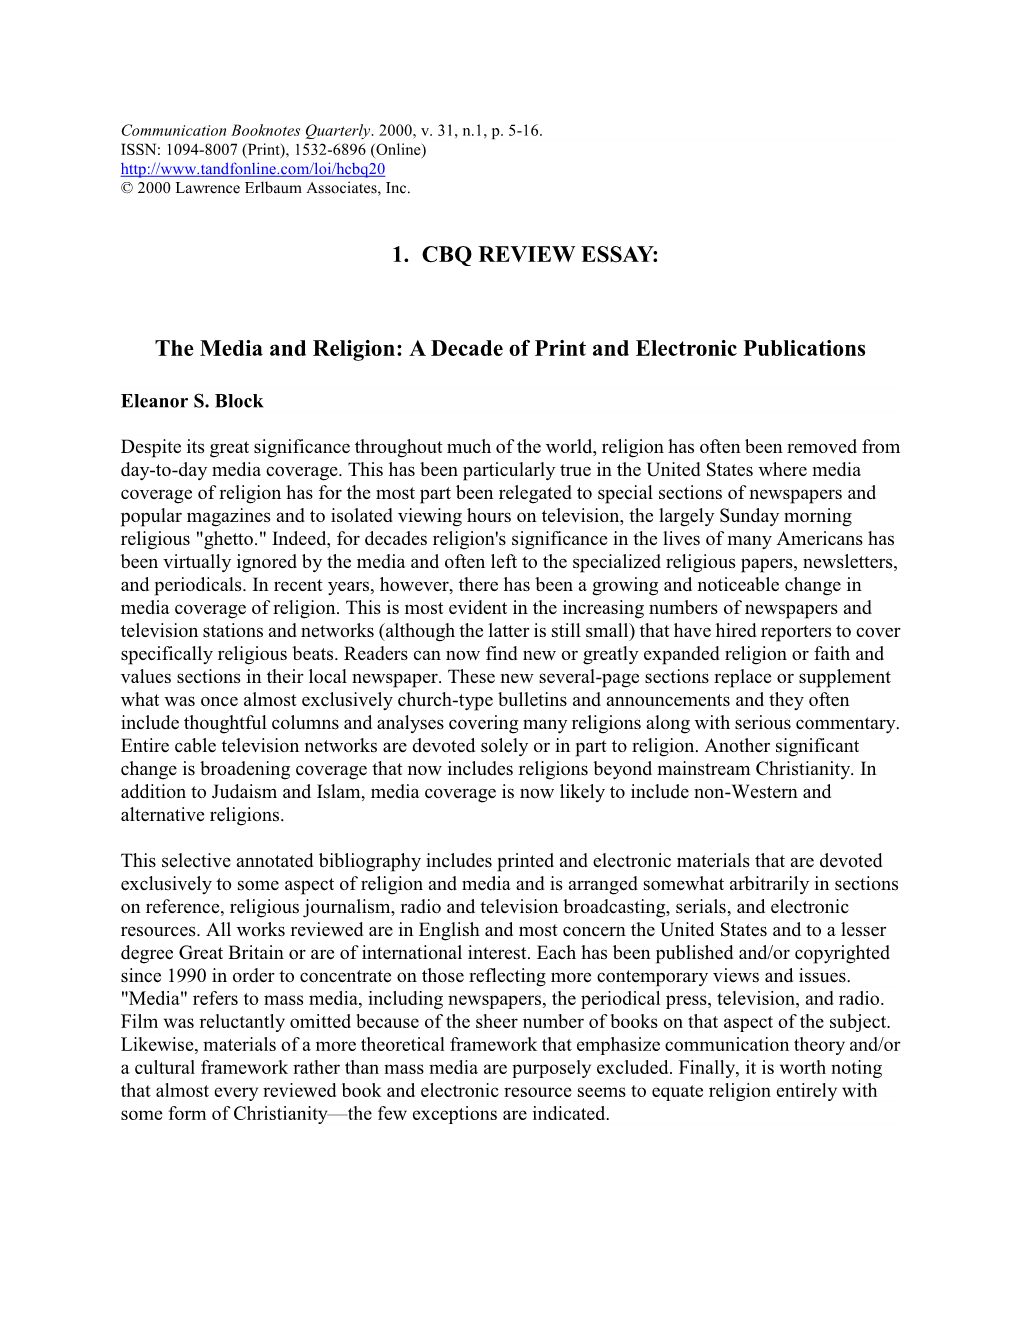 1. CBQ REVIEW ESSAY: the Media and Religion: a Decade of Print And